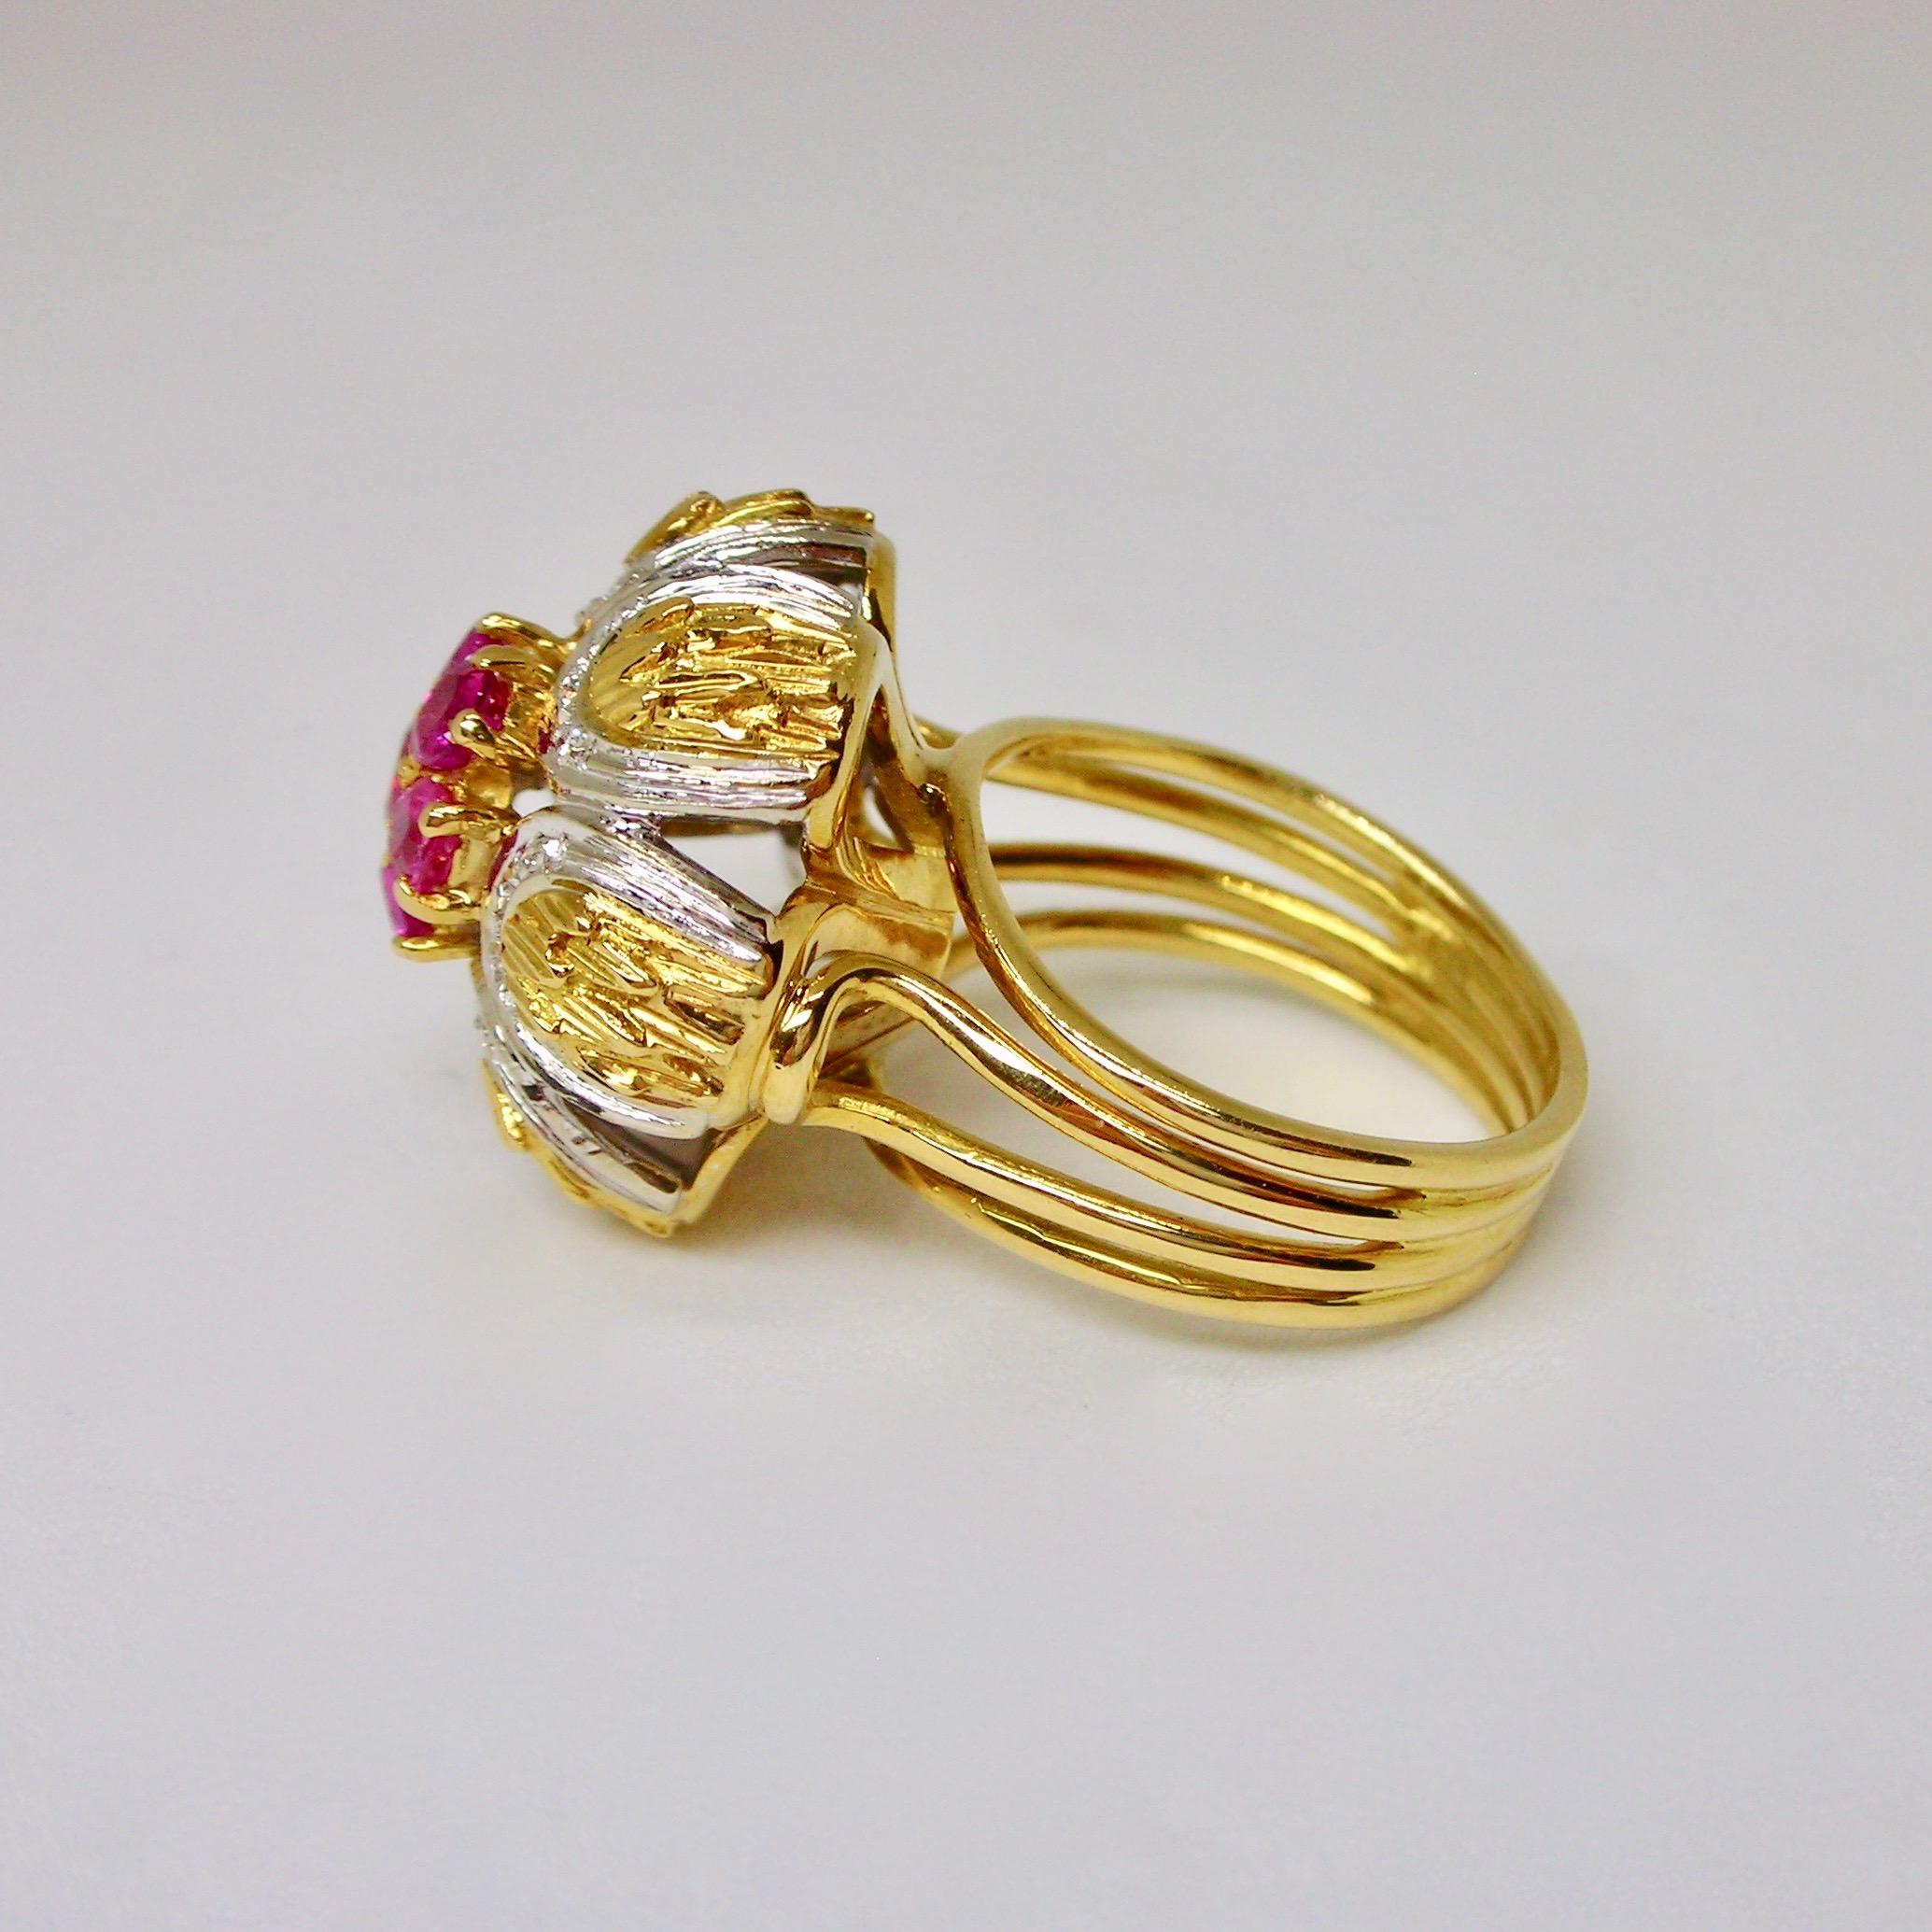 Women's 1960s Floral Rubies & Diamonds Cocktail Ring For Sale